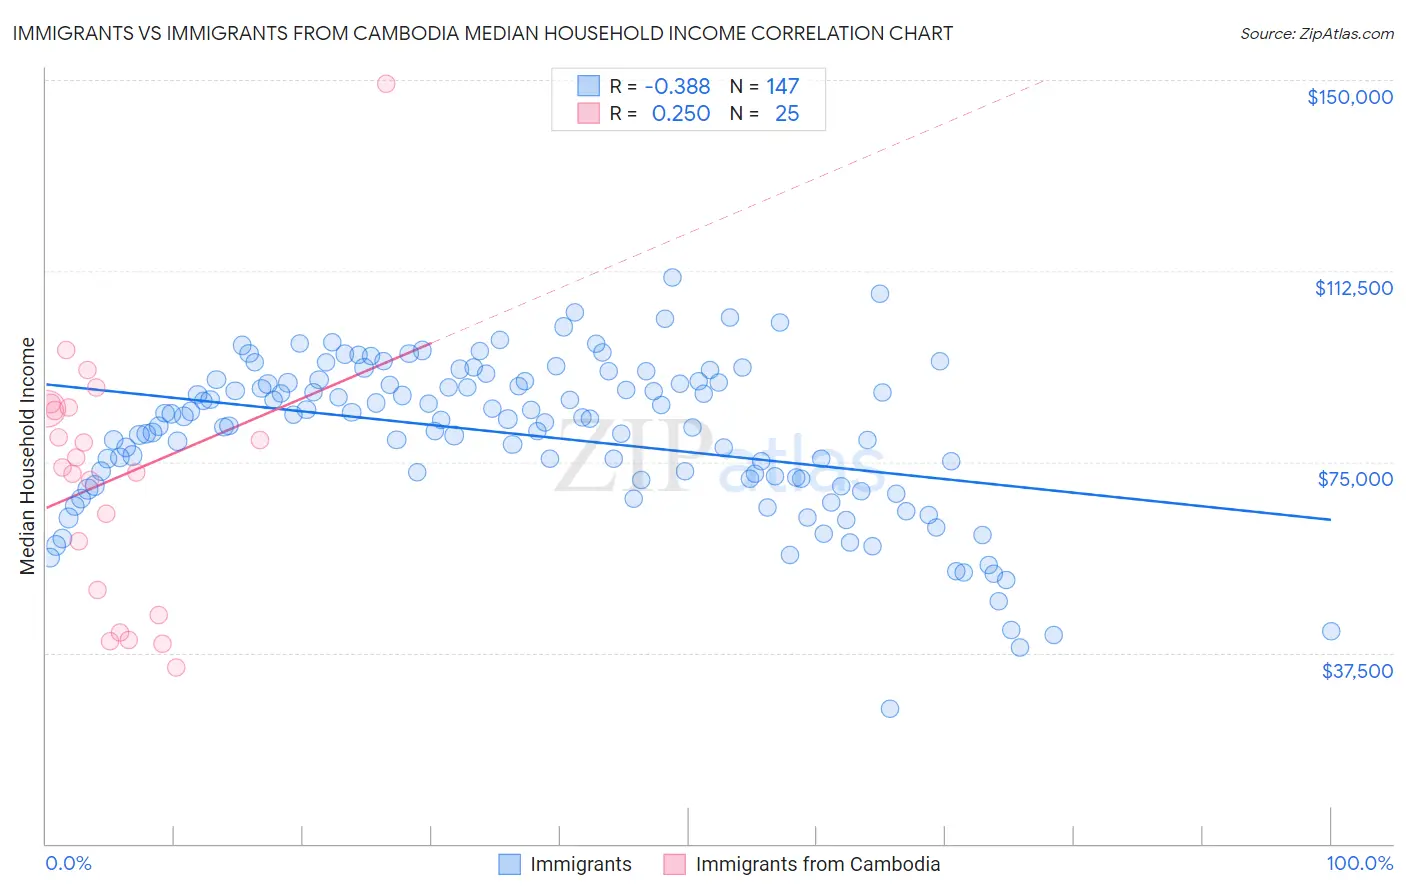 Immigrants vs Immigrants from Cambodia Median Household Income